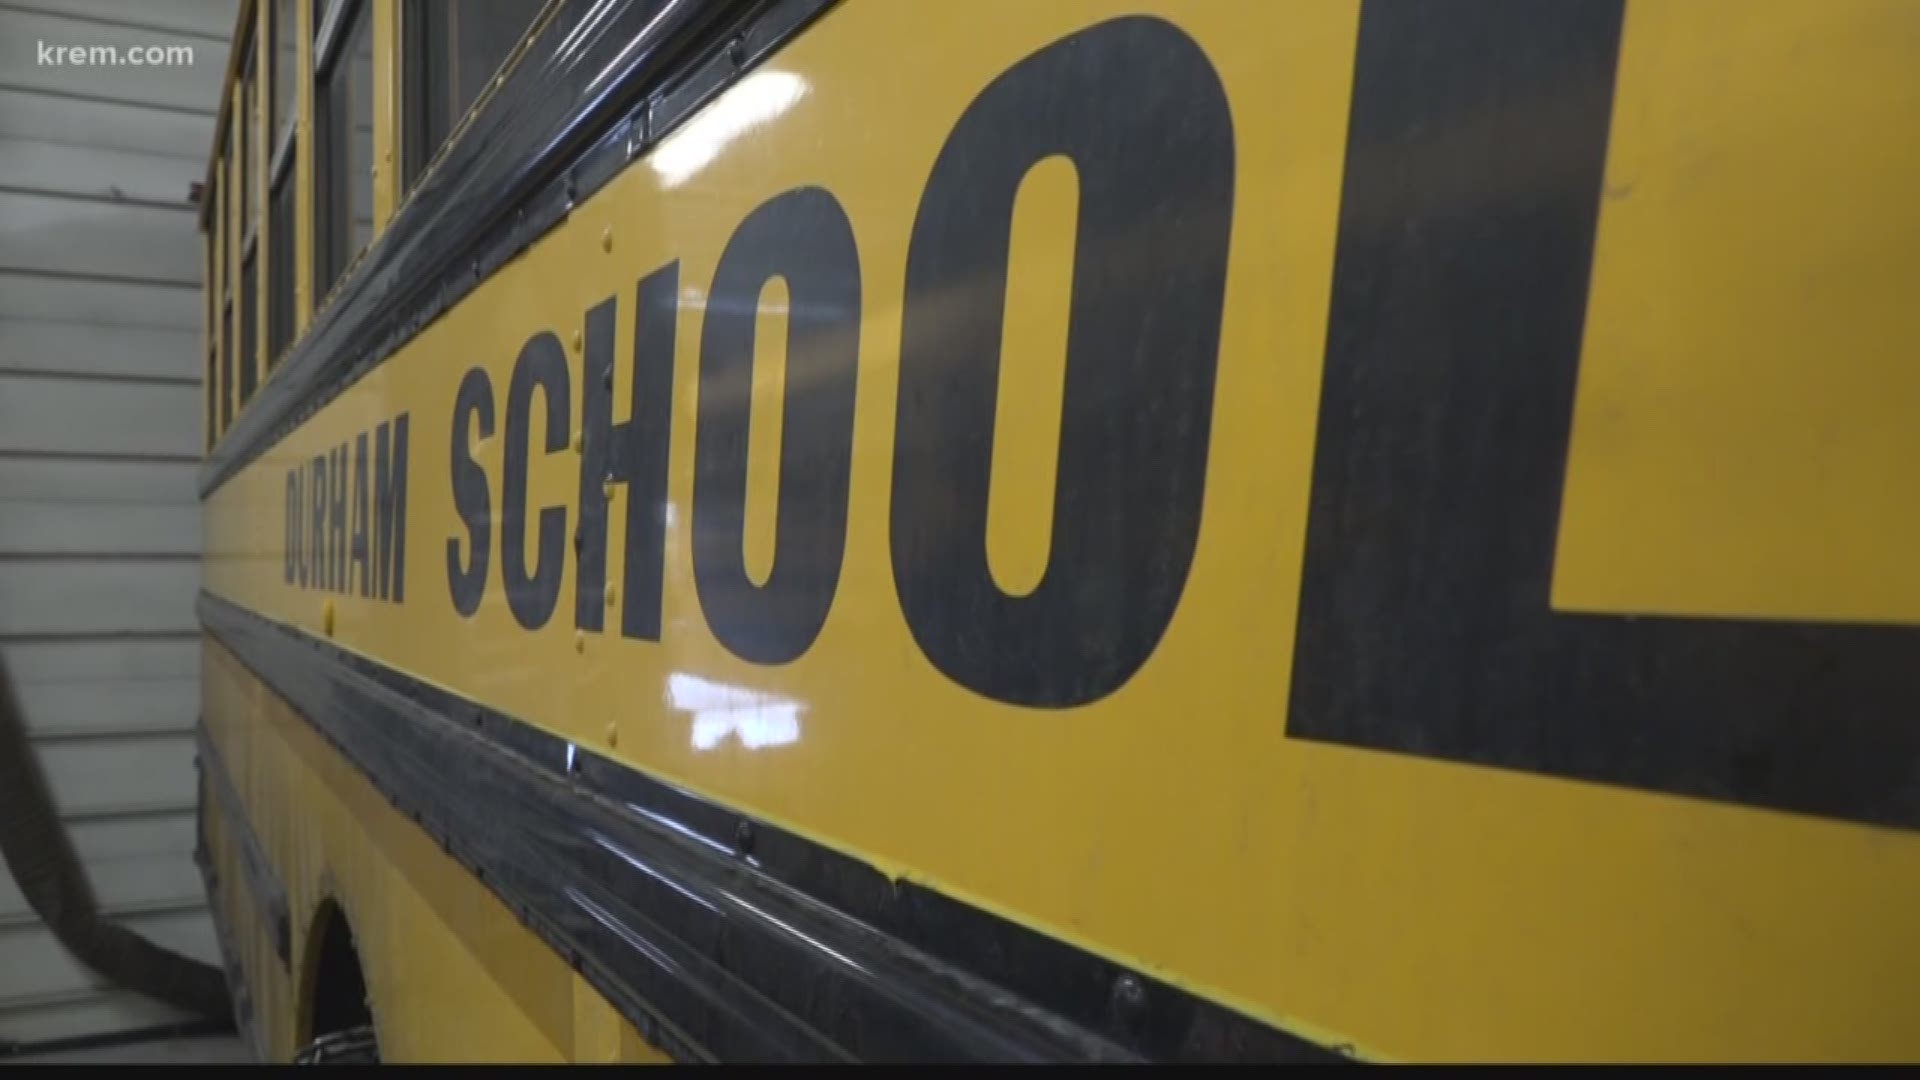 Spokane school buses implement tracking system